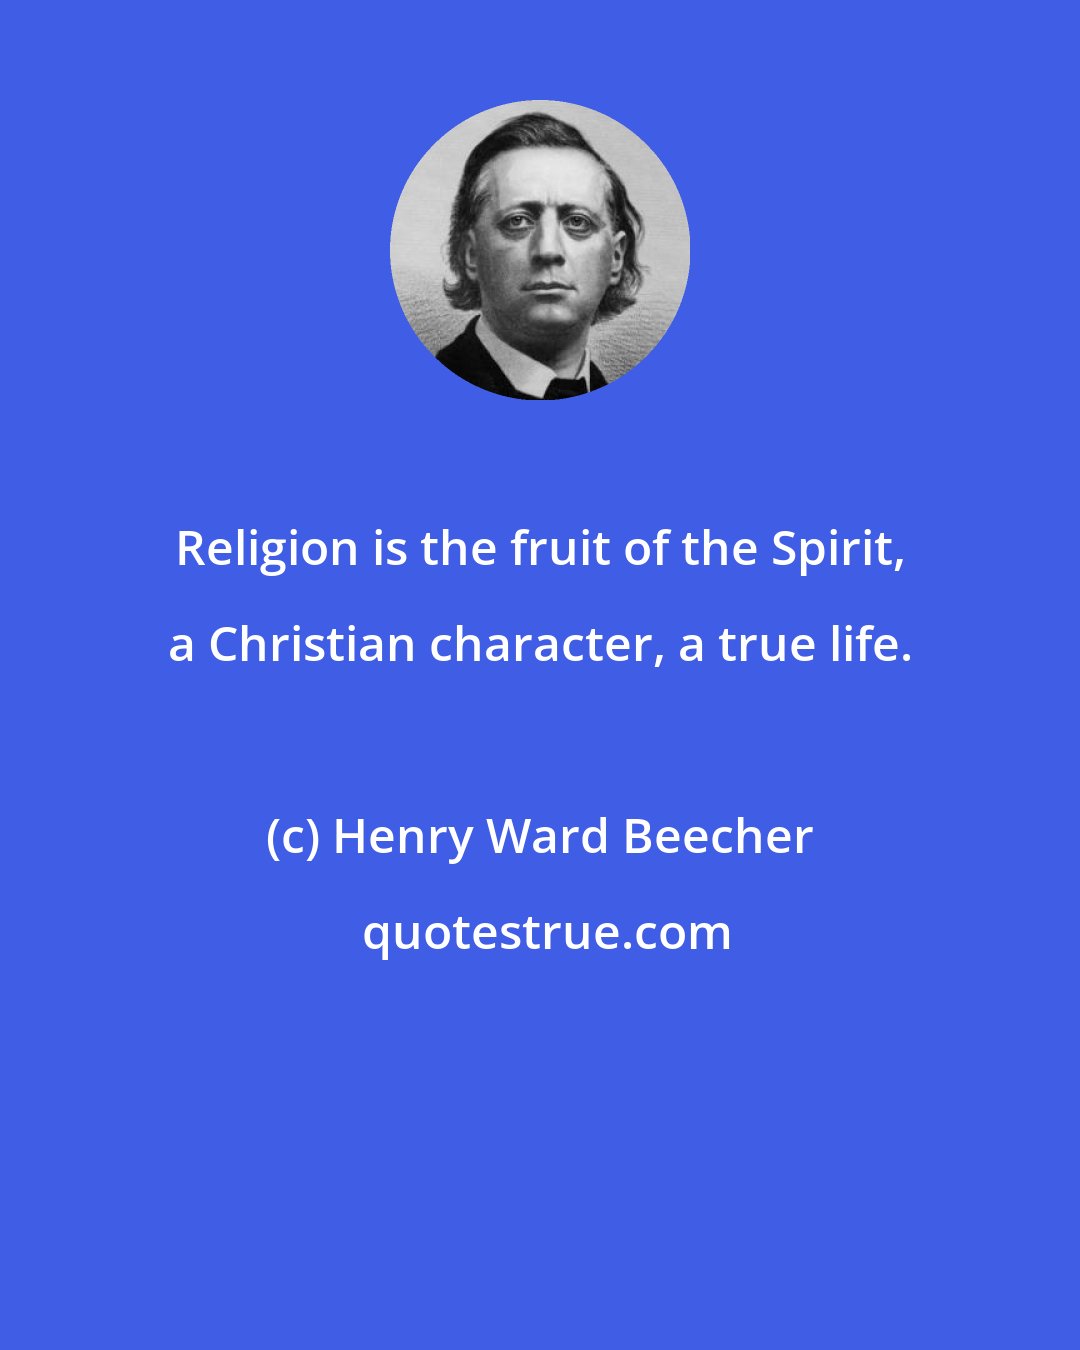 Henry Ward Beecher: Religion is the fruit of the Spirit, a Christian character, a true life.